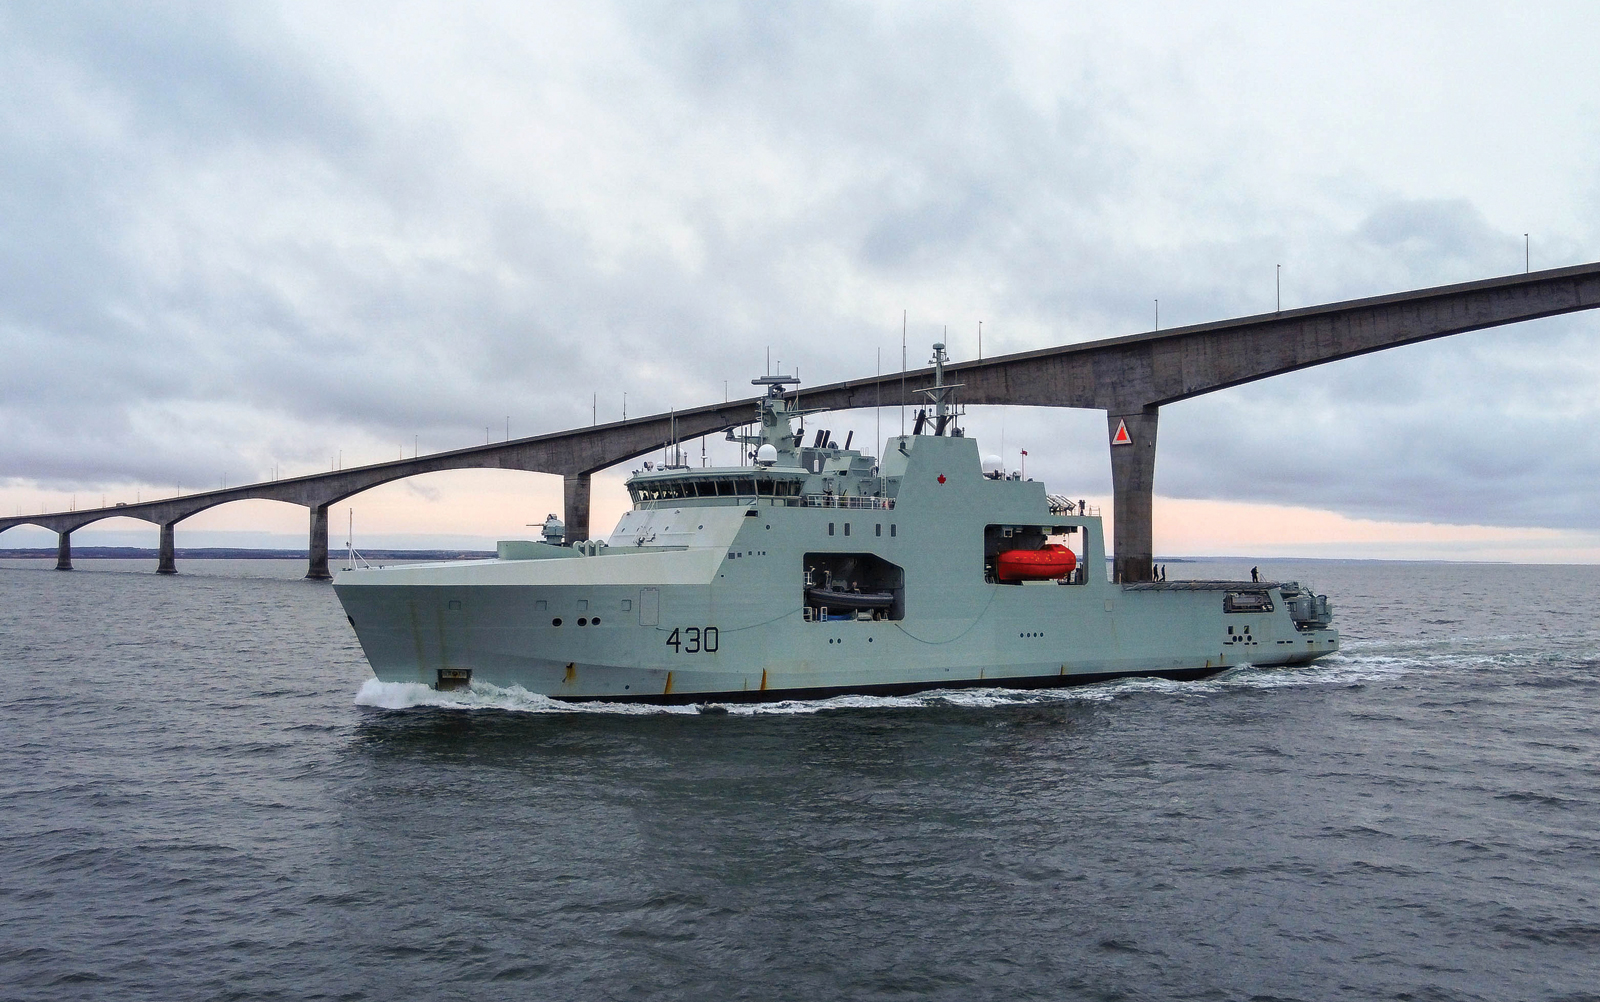 Harry DeWolf sails under the Confederation Bridge between Prince Edward Island and New Brunswick. Photo by Corporal David Veldman, Canadian Armed Forces